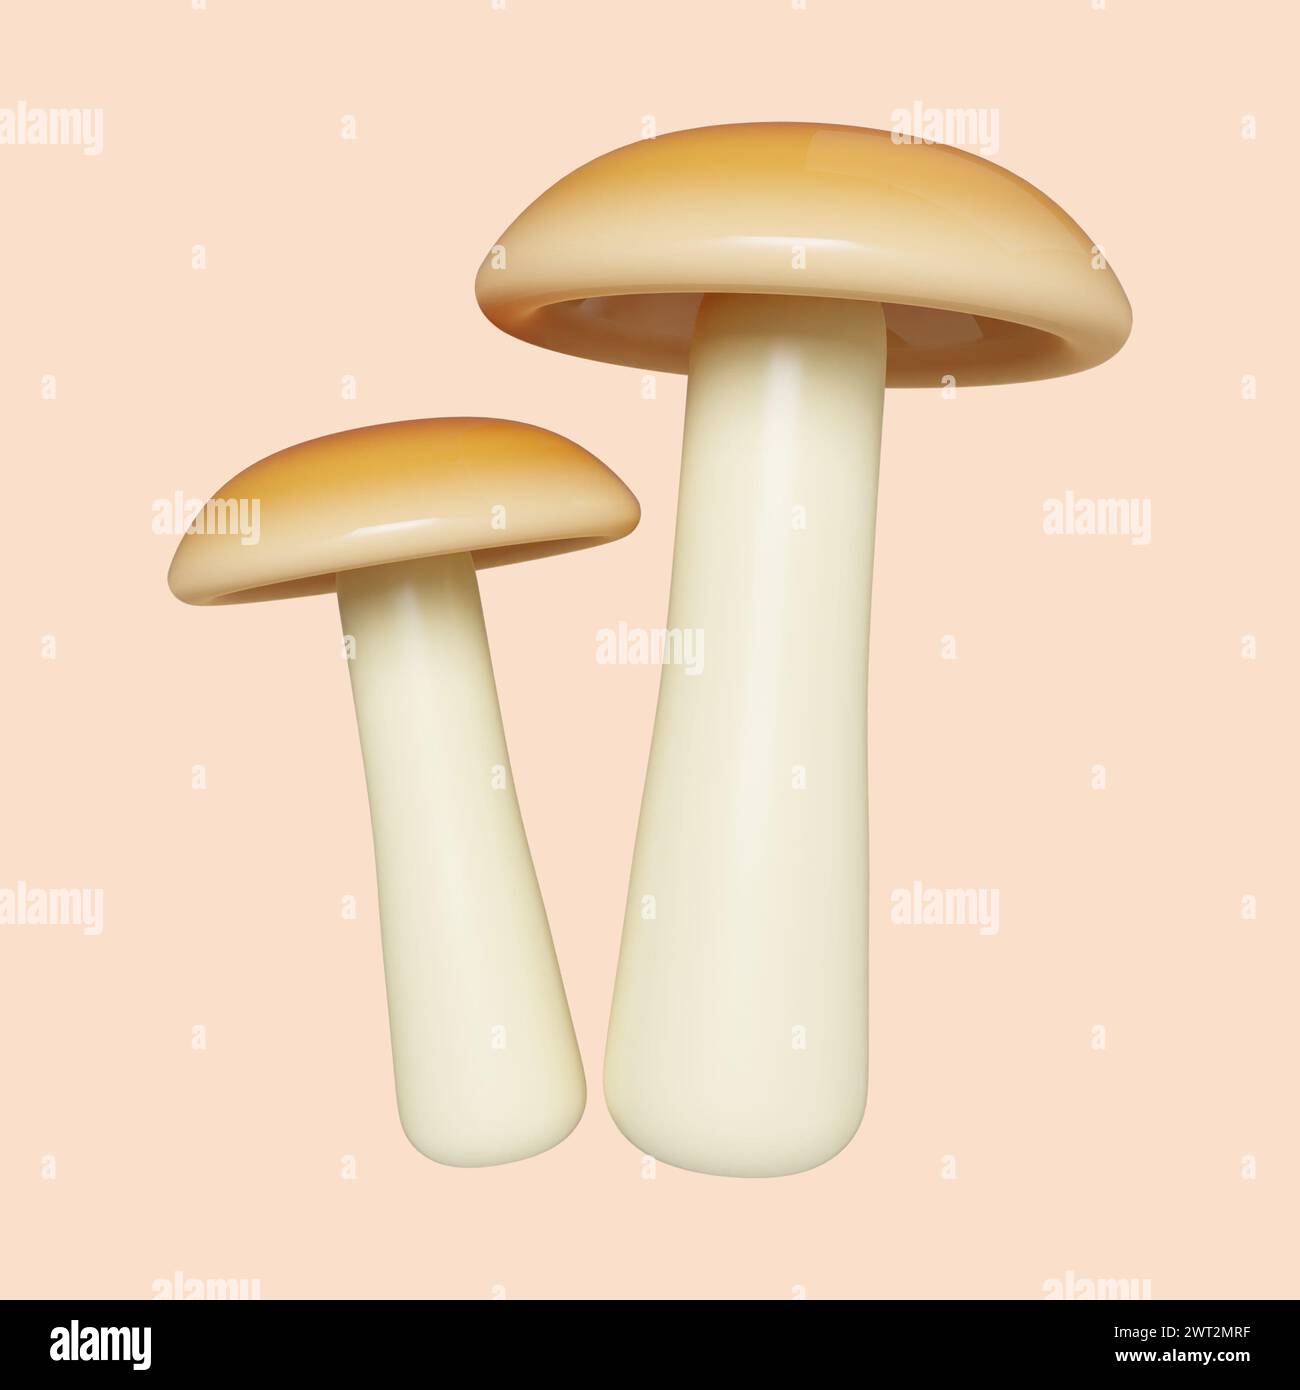 3d Autumn mushroom. Golden fall. Season decoration. icon isolated on gray background. 3d rendering illustration. Clipping path. Stock Photo